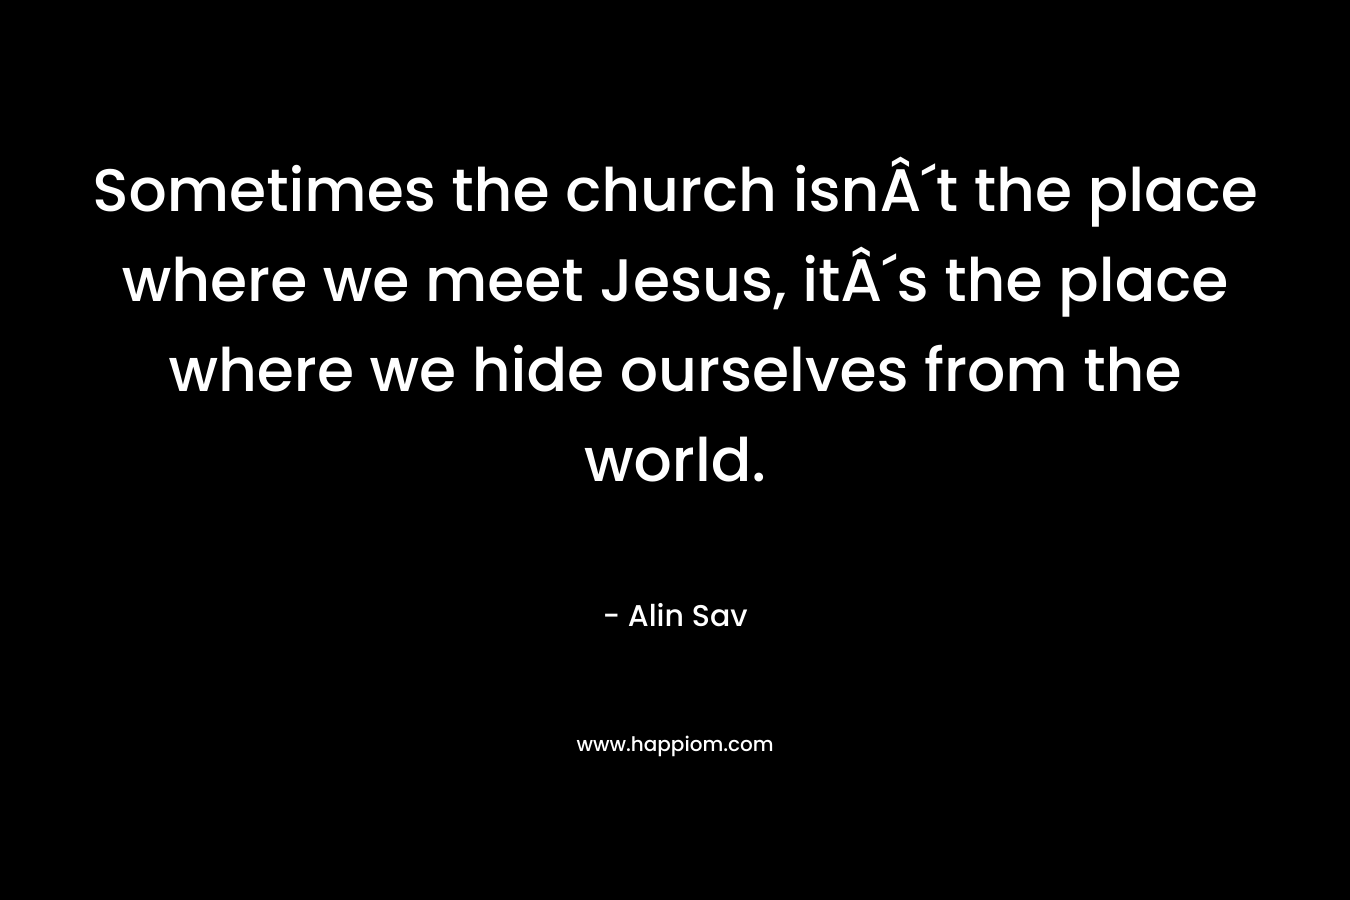 Sometimes the church isnÂ´t the place where we meet Jesus, itÂ´s the place where we hide ourselves from the world.